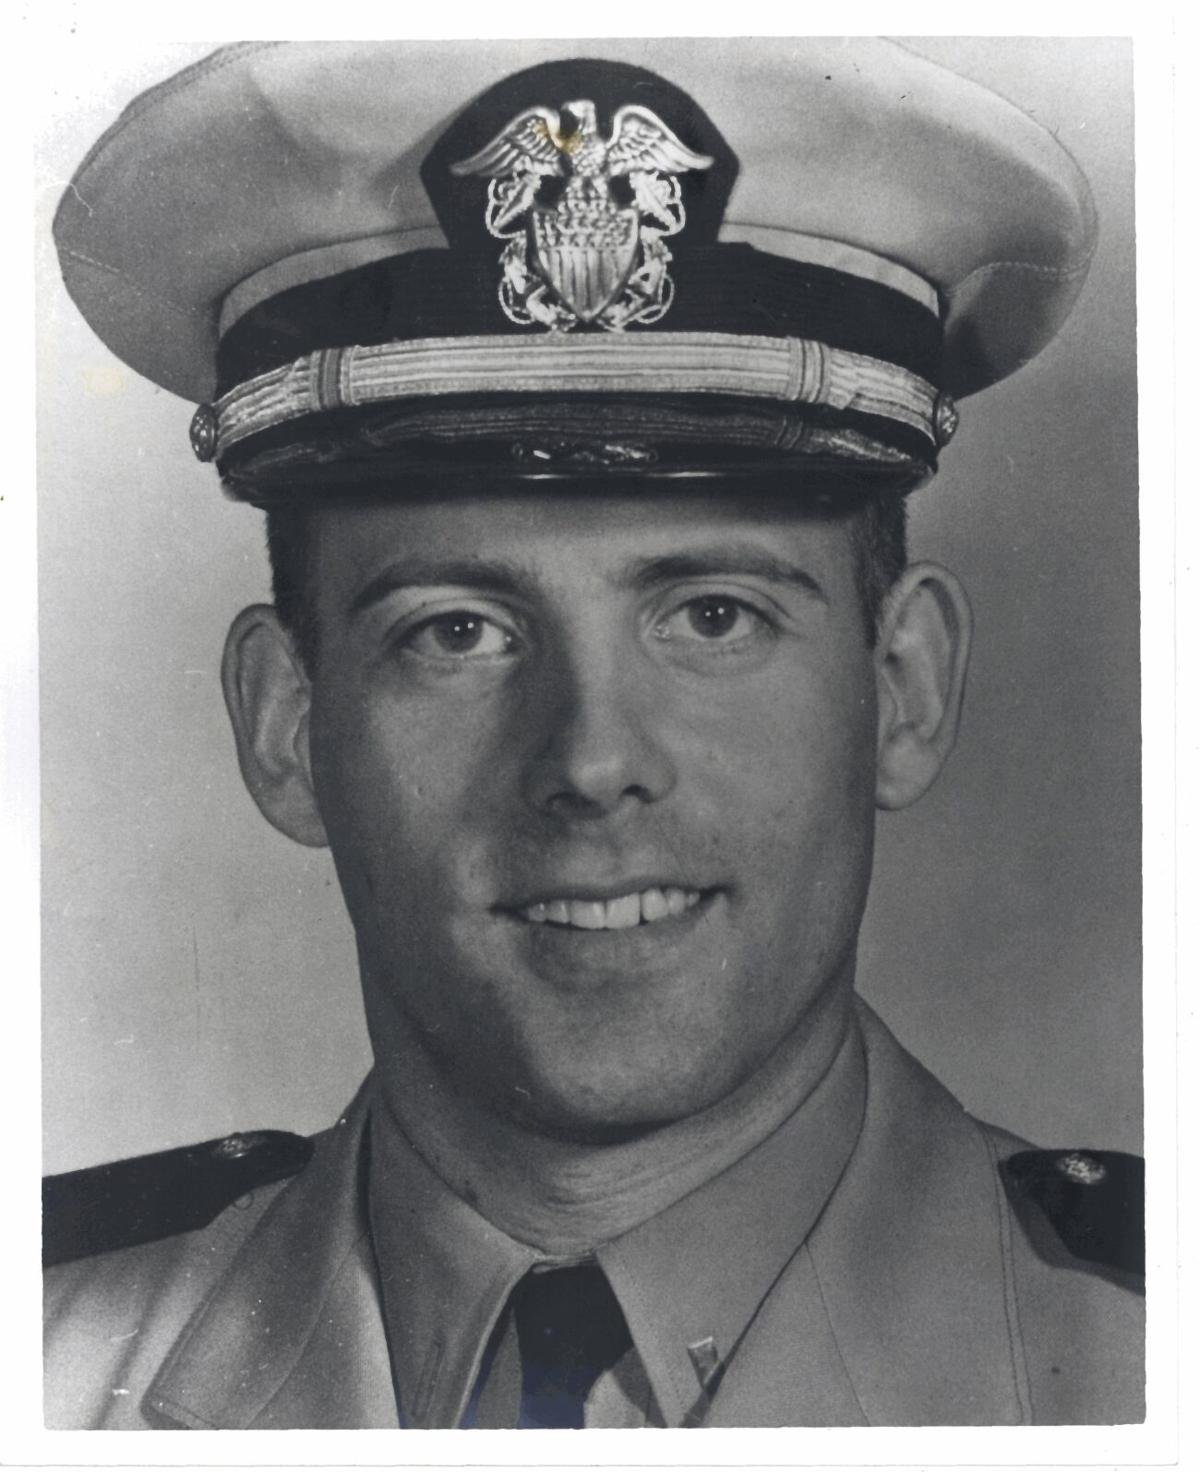 Vietnam War soldier from Grandview identified after over 50 years